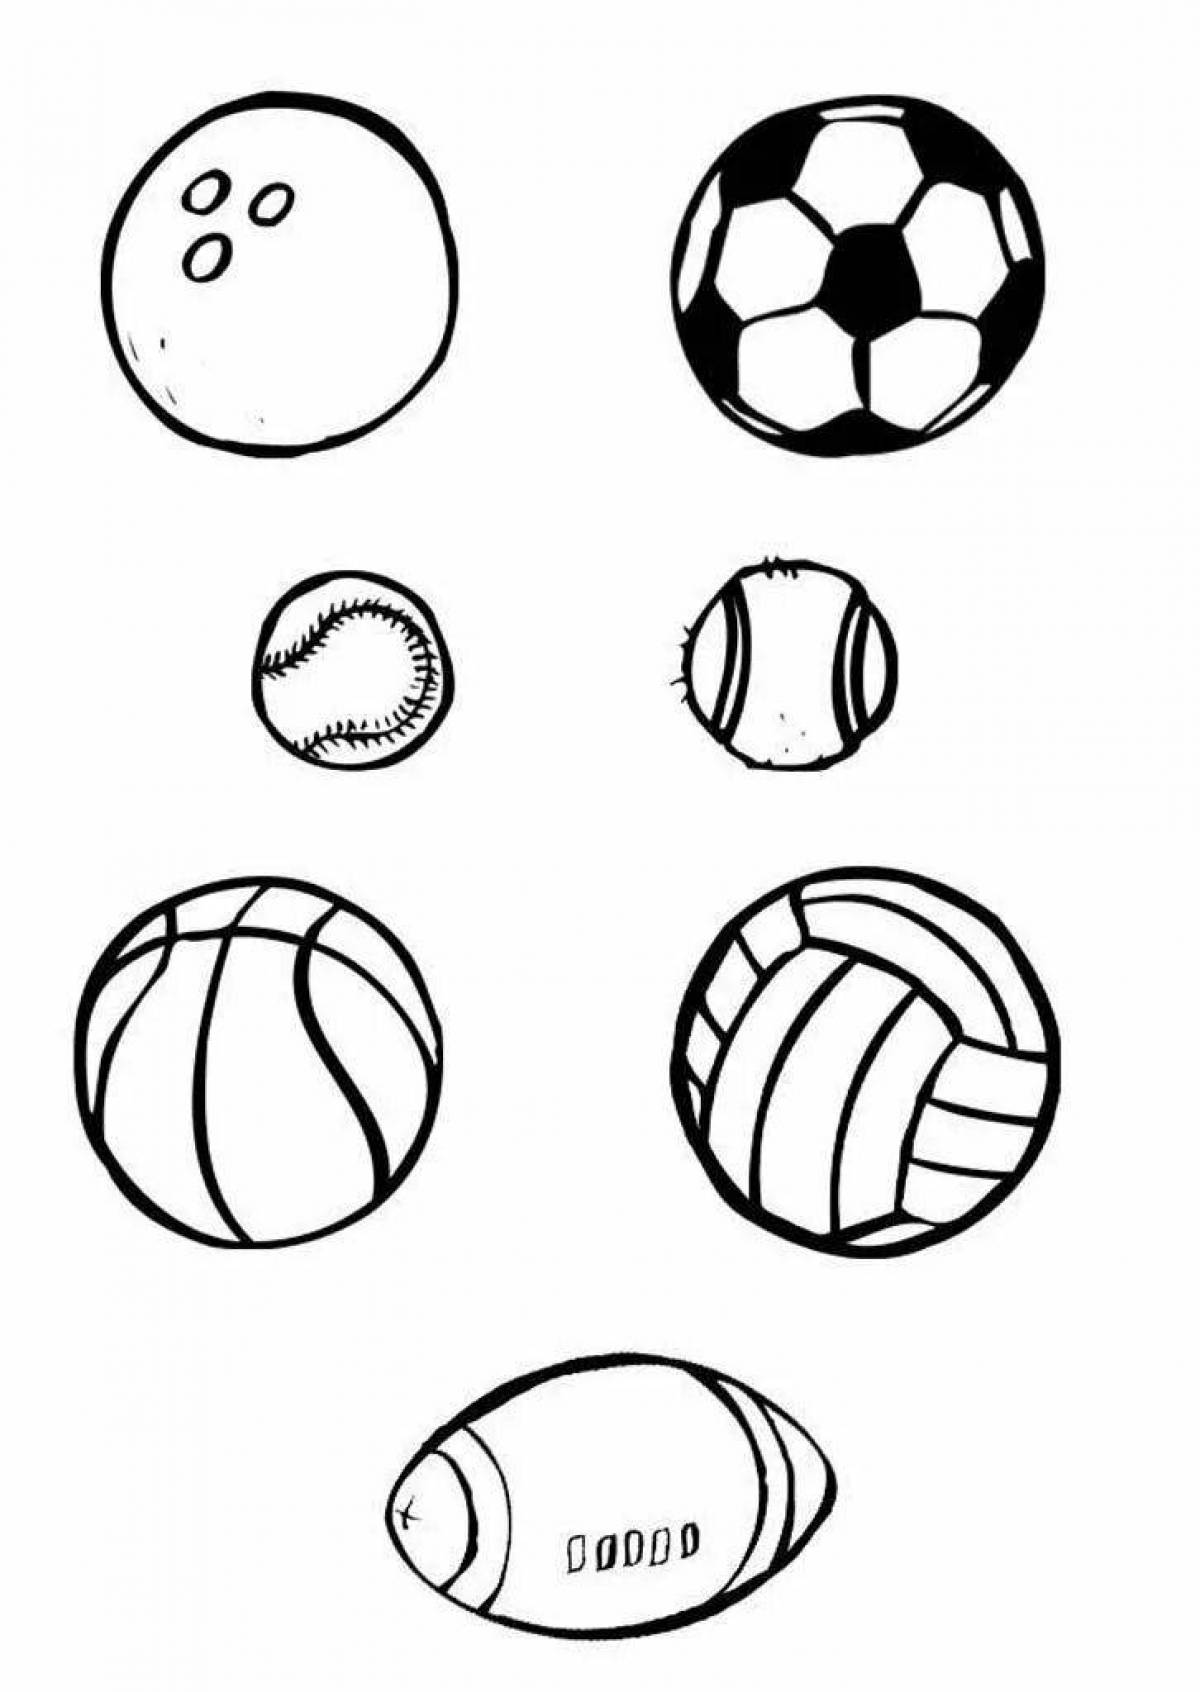 Outstanding soccer ball coloring page for kids